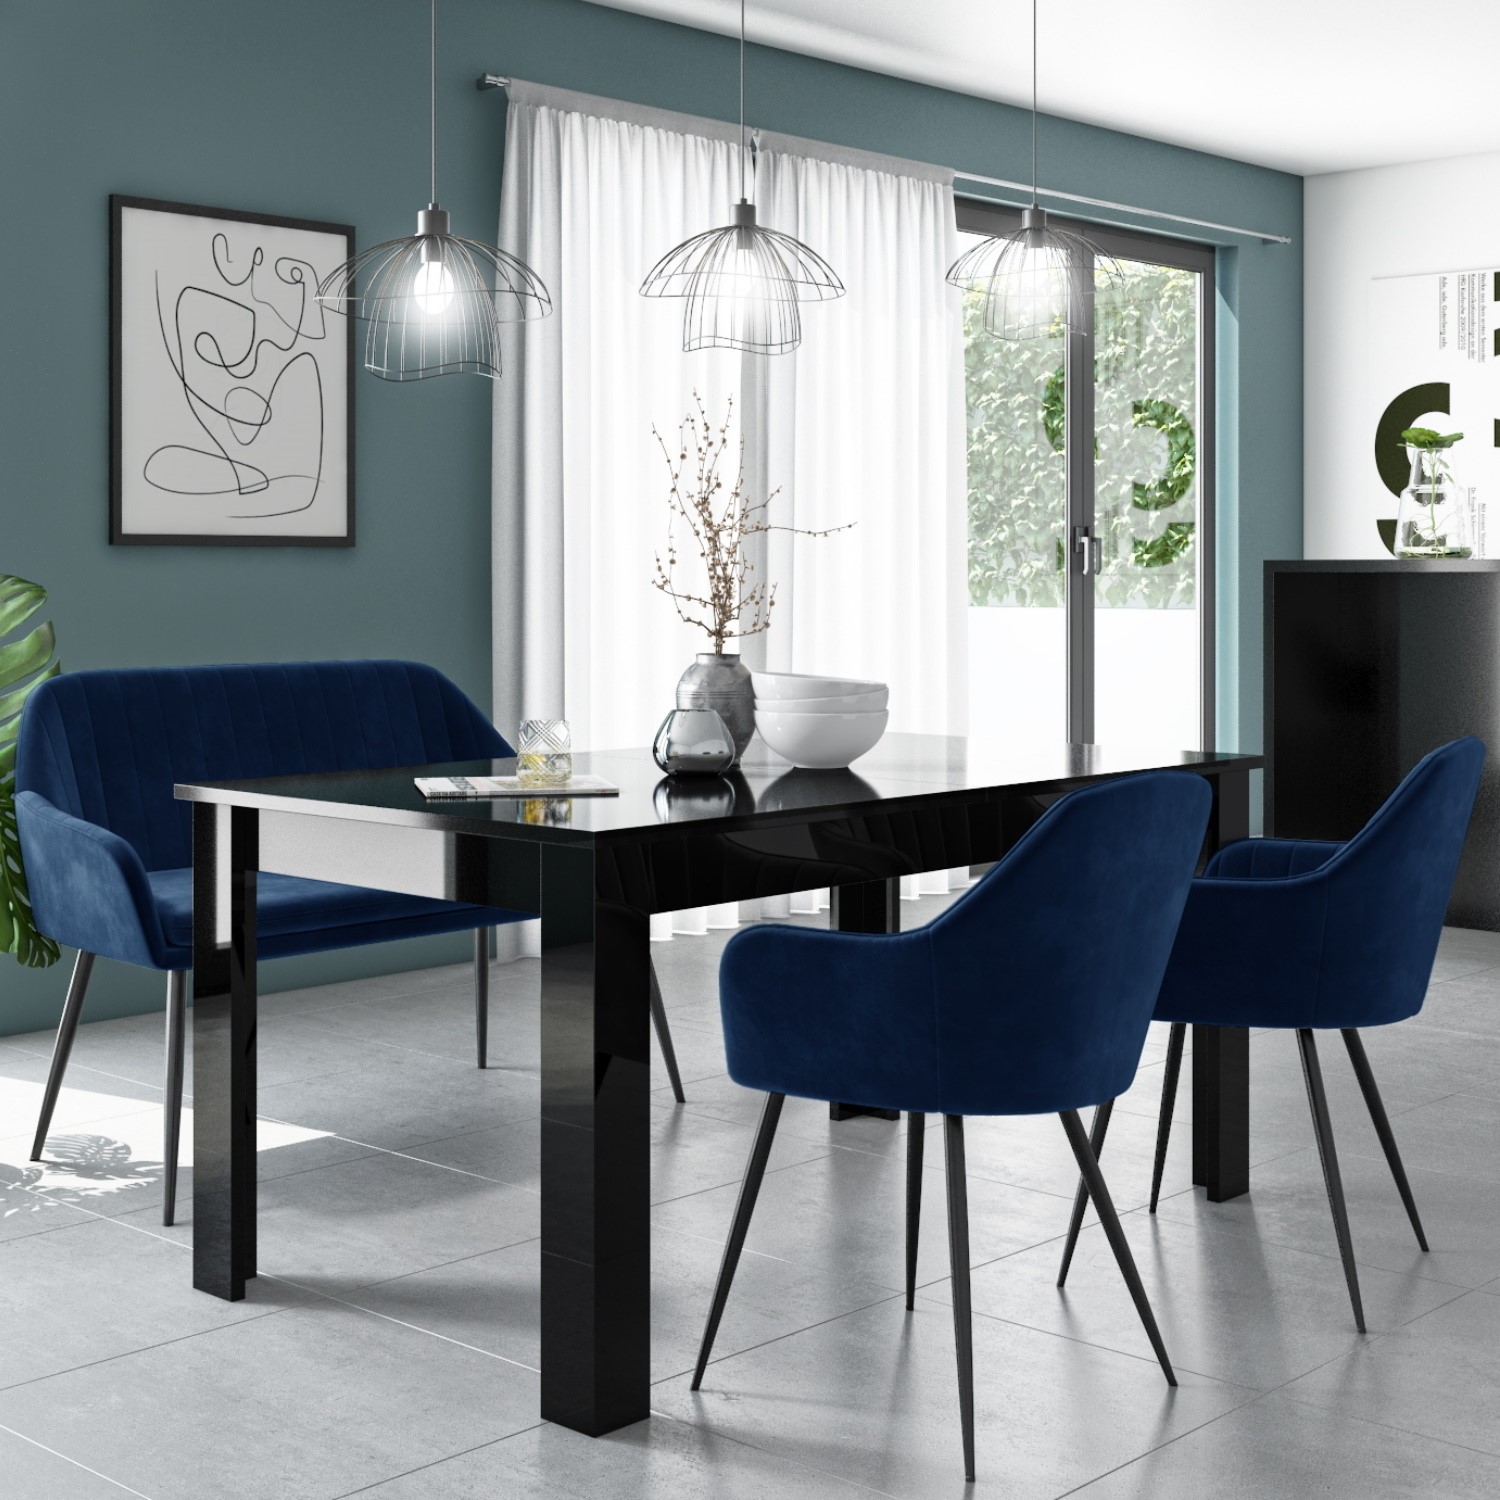 Photo of Black gloss extendable dining table with 2 navy blue velvet dining chairs and 1 high back dining bench - seats 4 - vivie